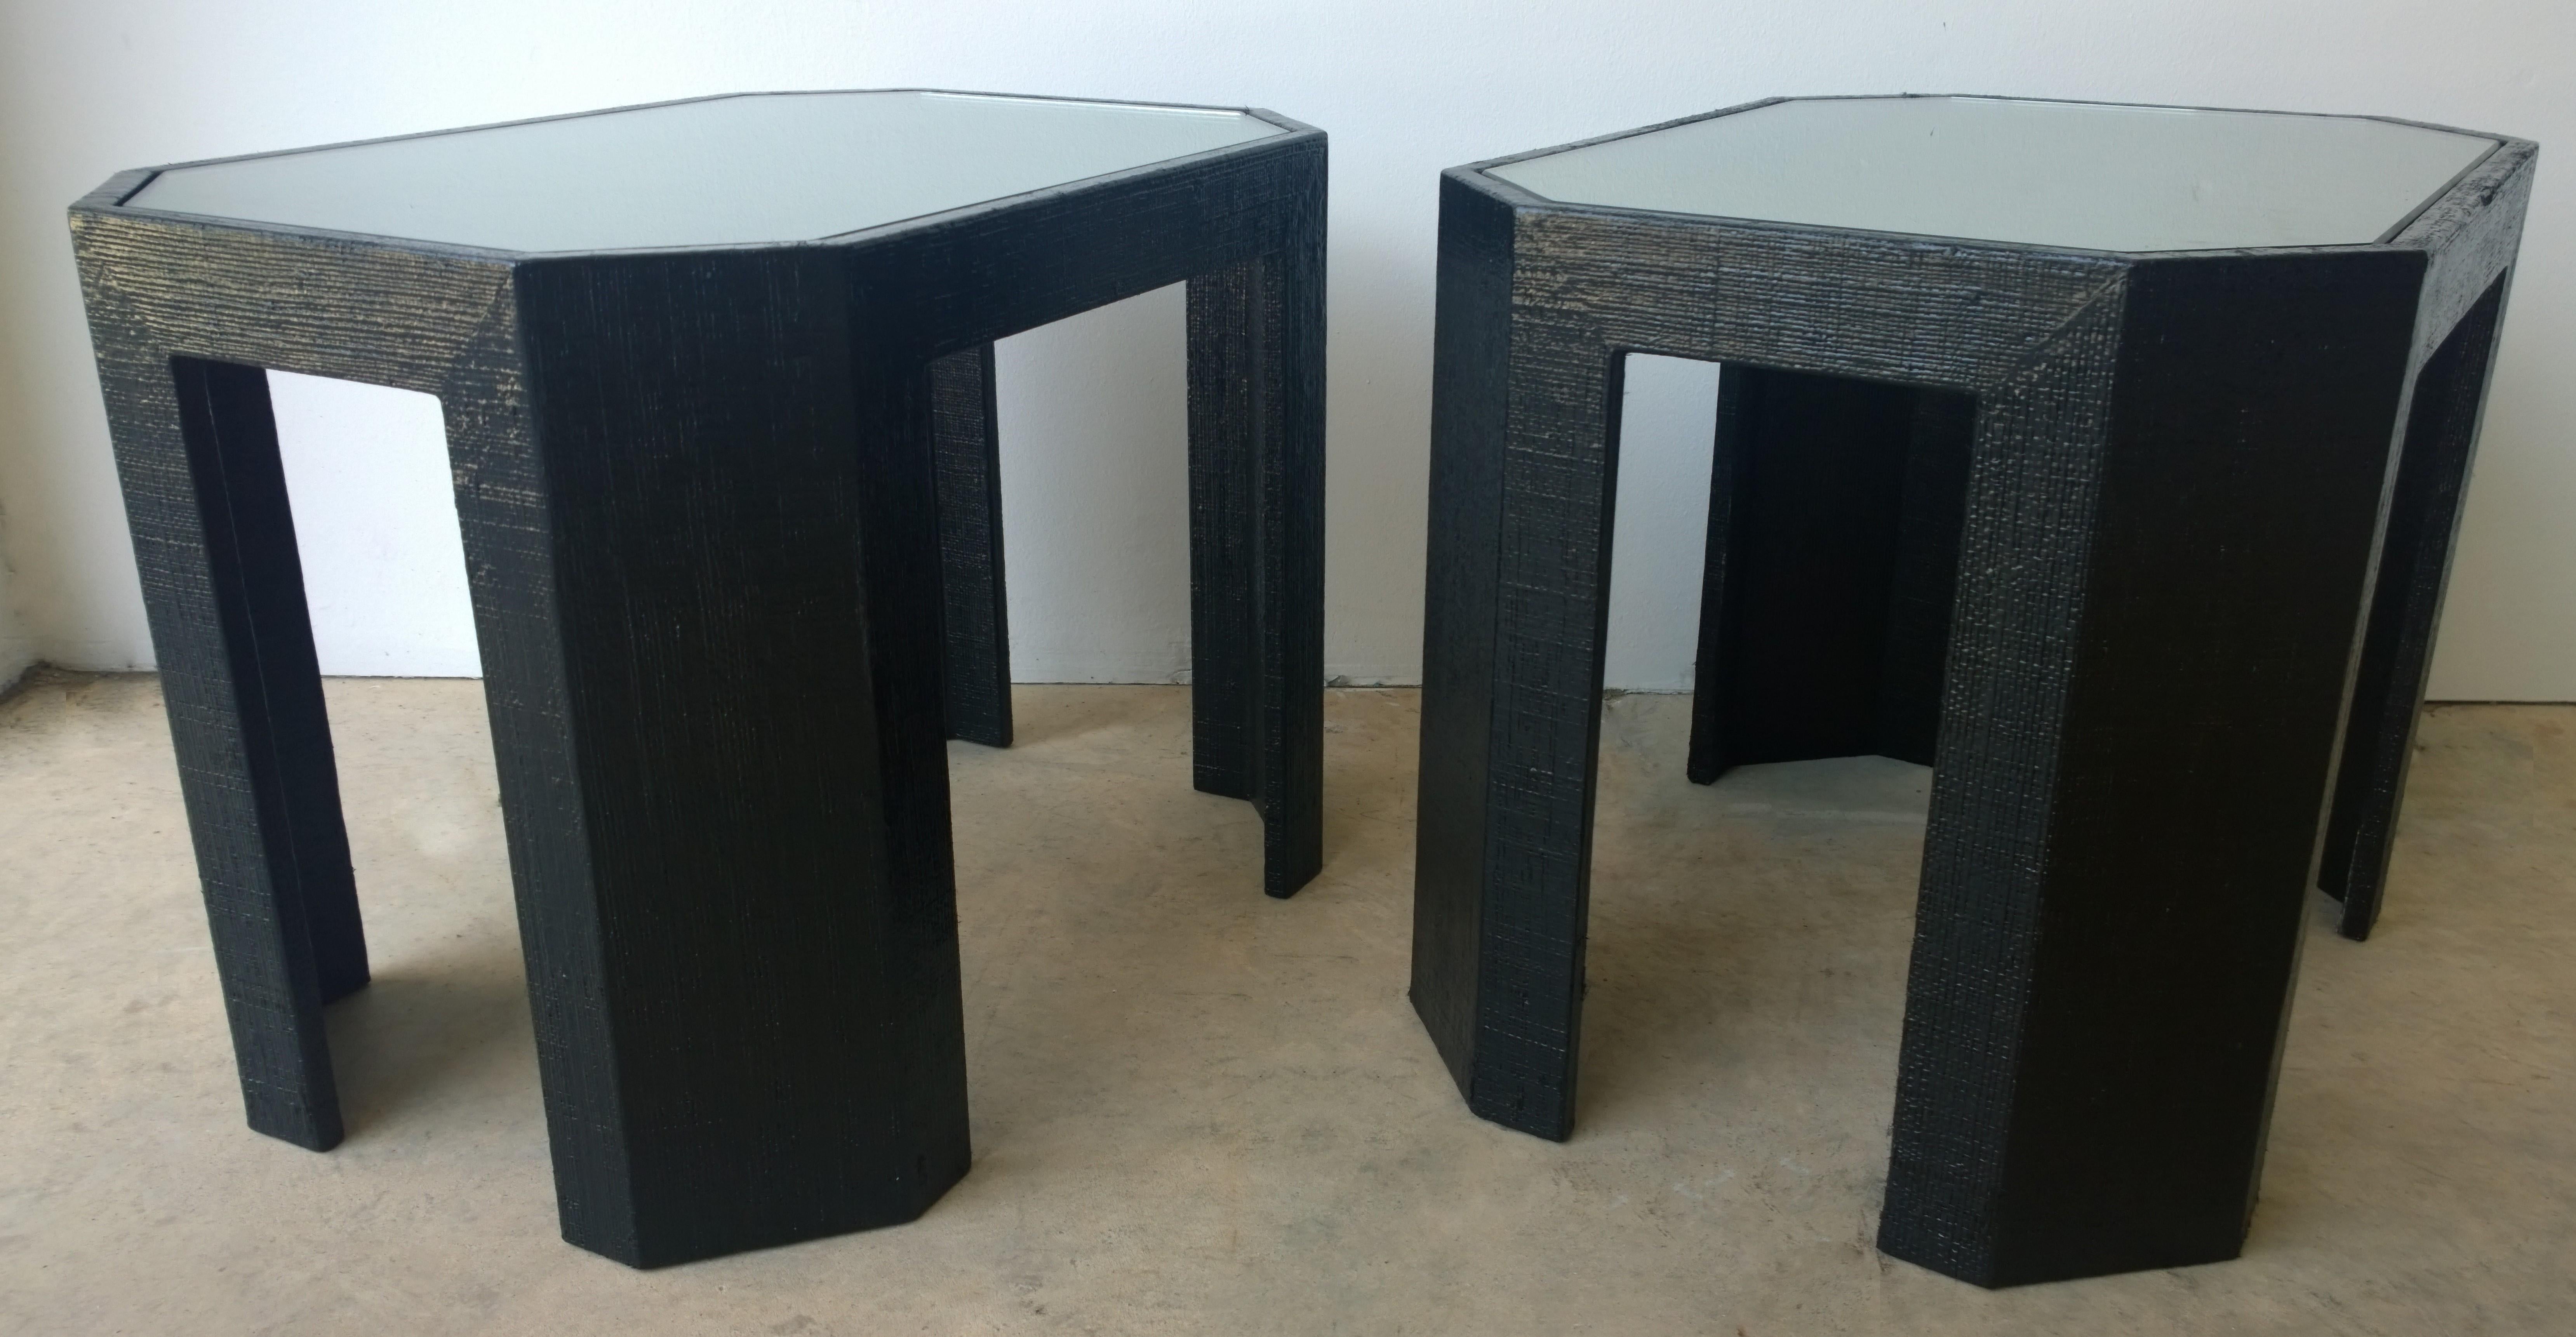 Lorin Marsh Newly Lacquered Grasscloth in Black with Glass Side/End Tables, Pair 1